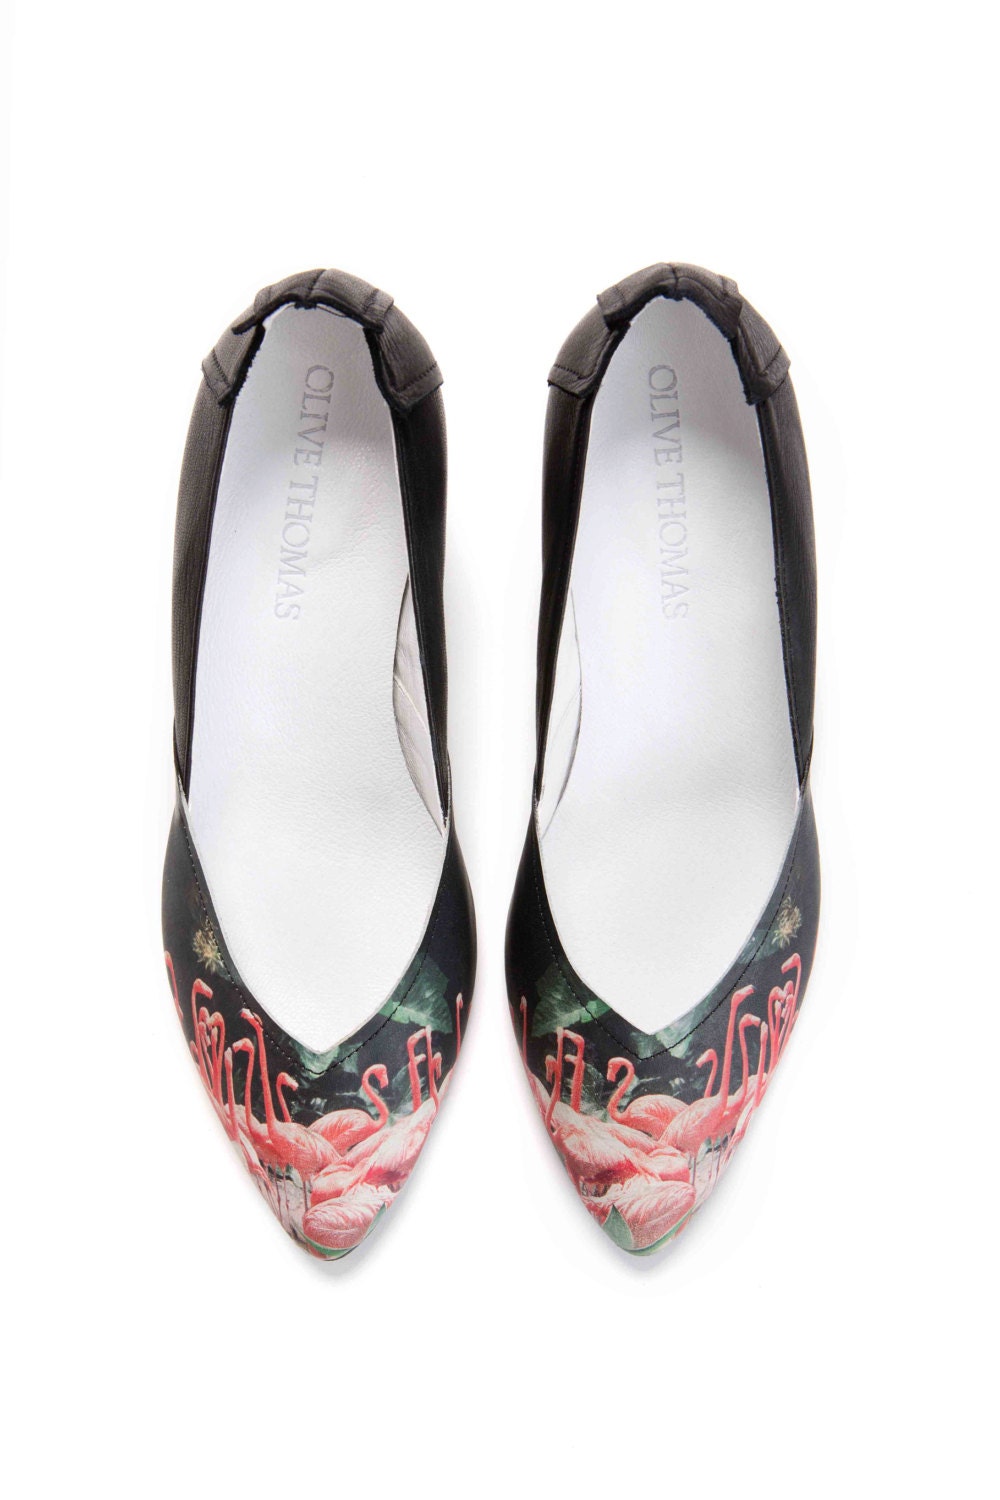 Limited Edition Juliette Pump with Flamingo Print & Matching Tee